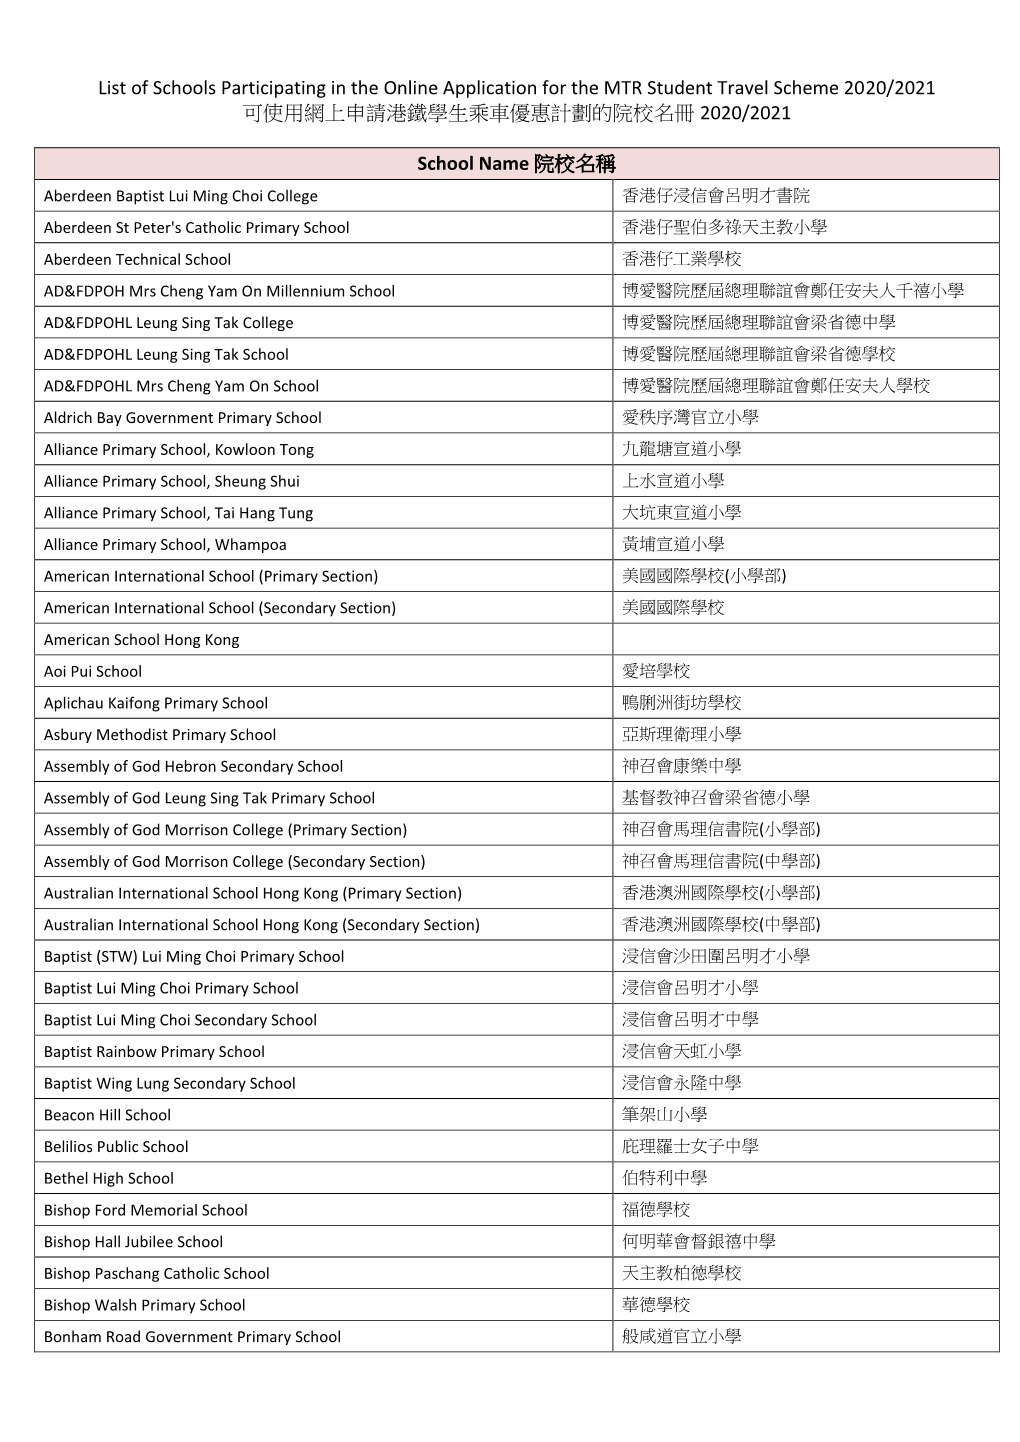 List of Schools Participating in the Online Application for the MTR Student Travel Scheme 2020/2021 可使用網上申請港鐵學生乘車優惠計劃的院校名冊 2020/2021